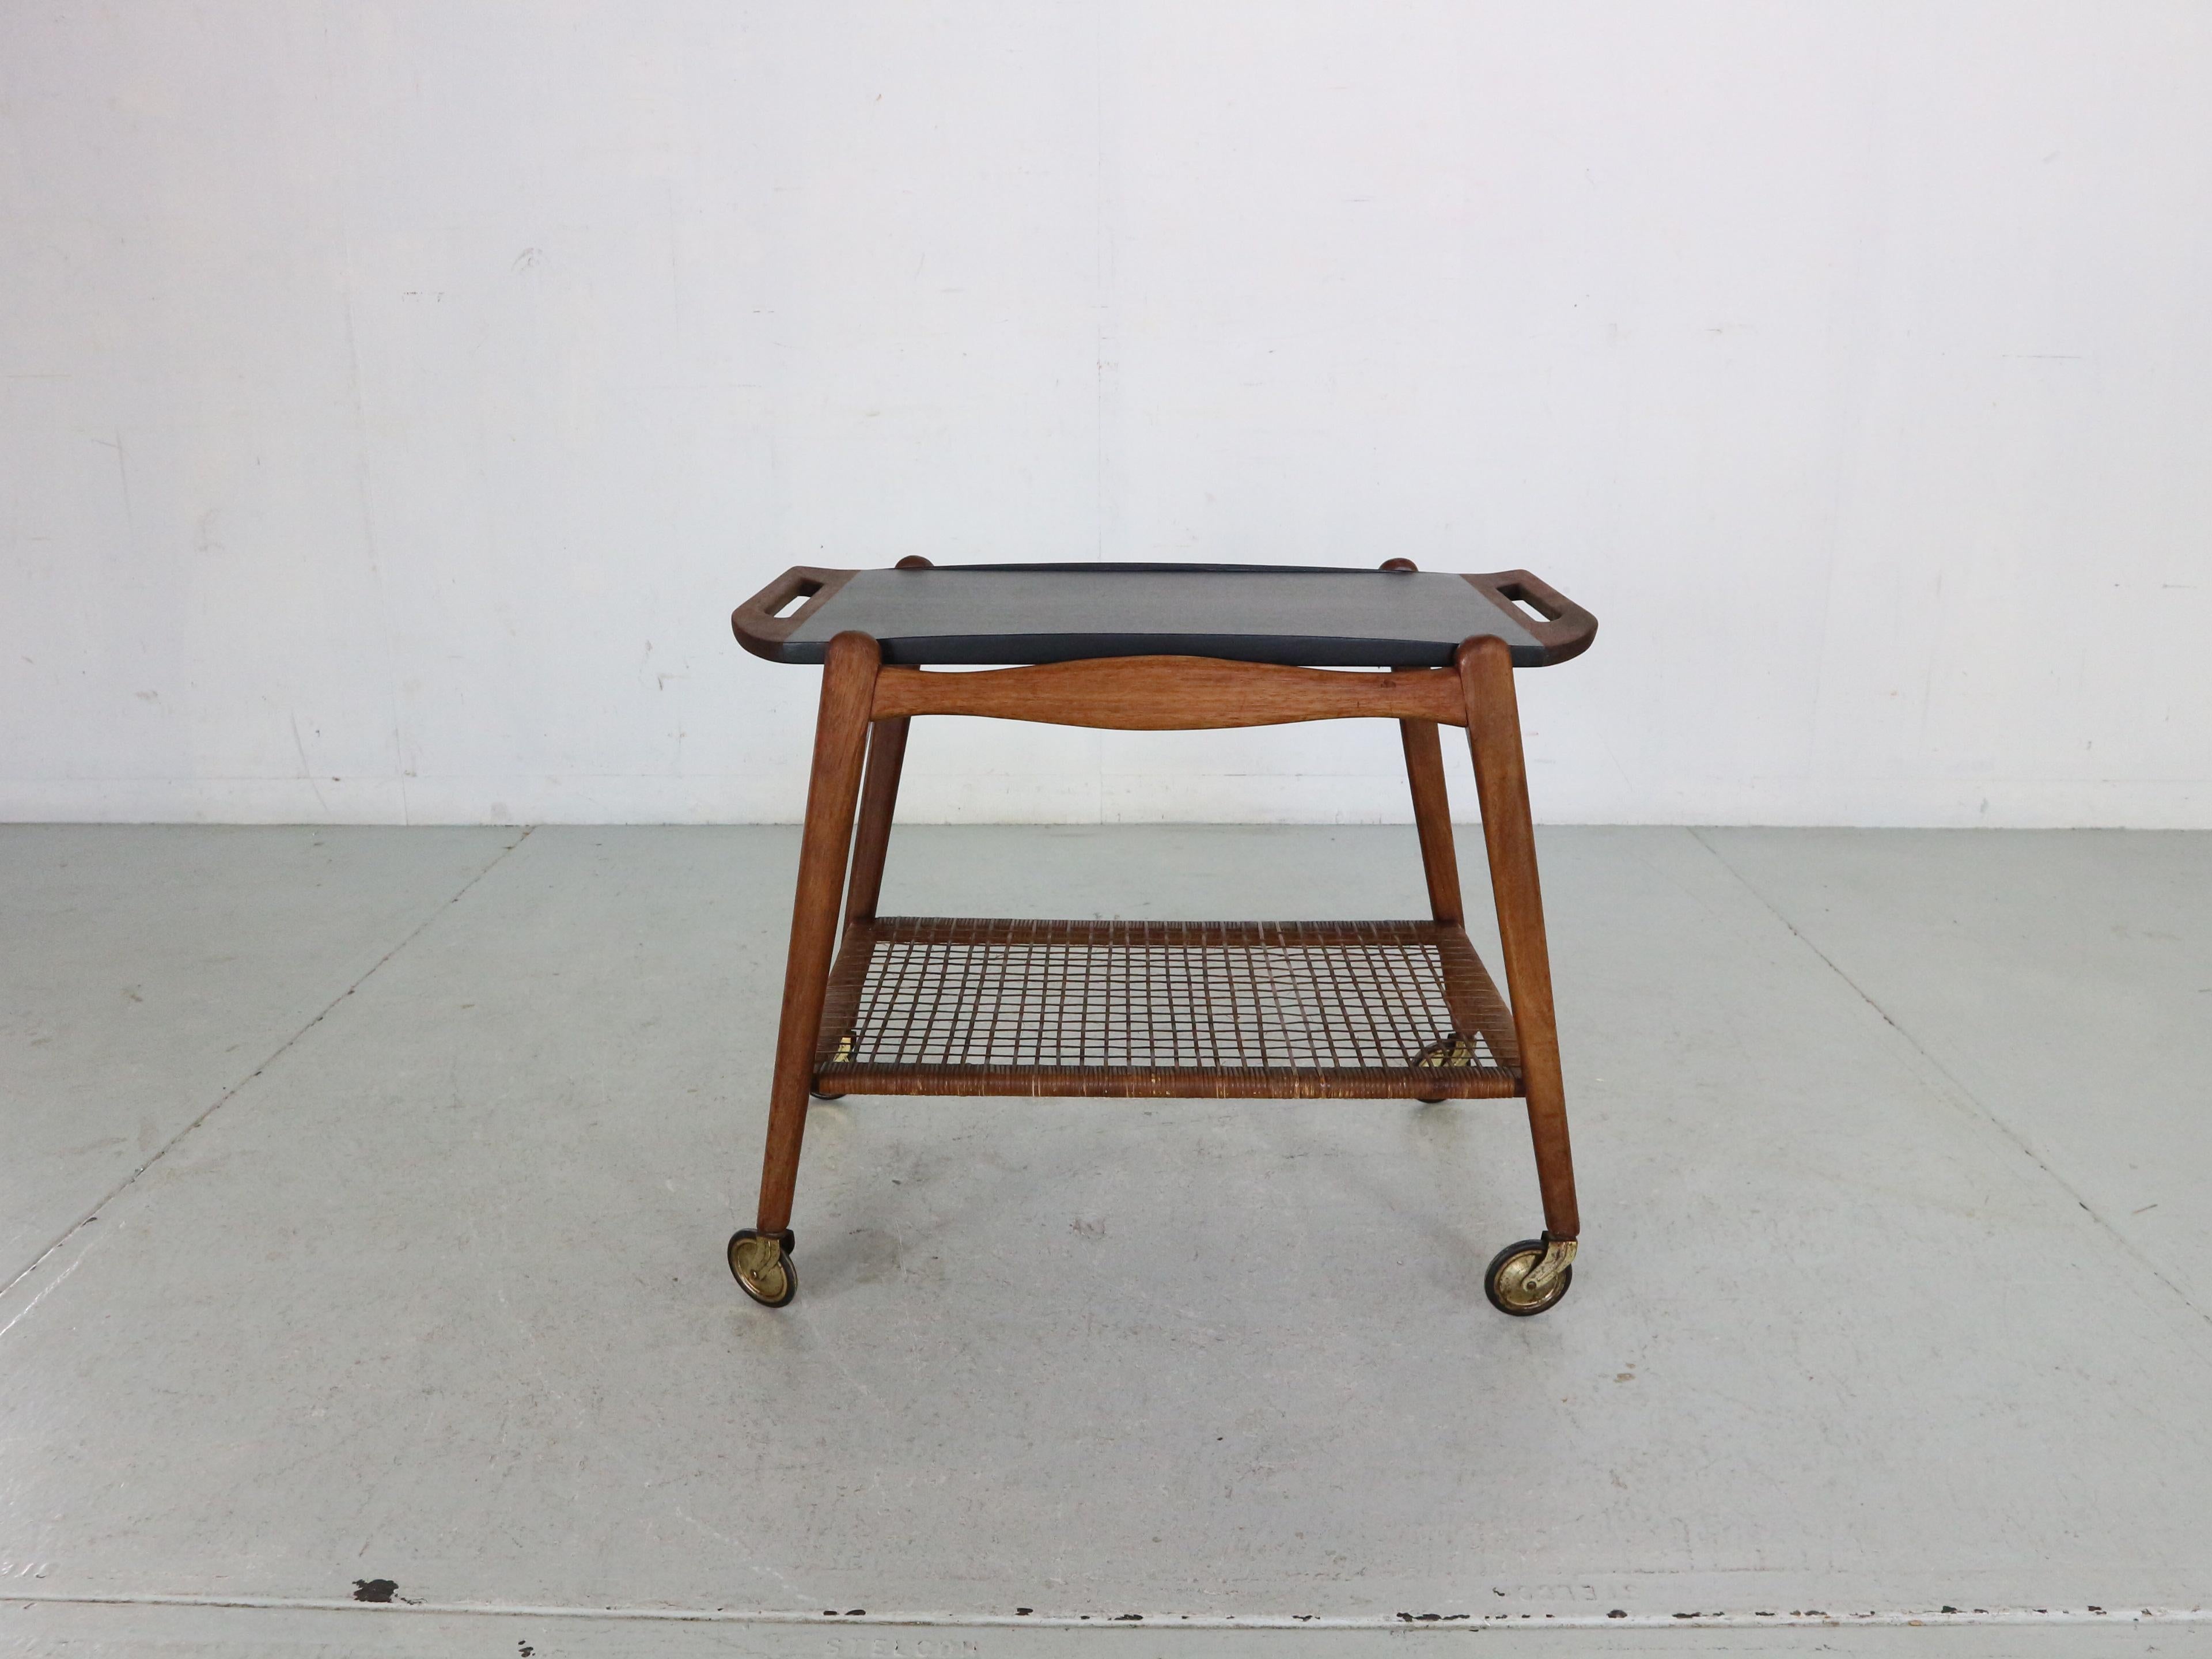 Teak serving trolley by Johannes Andersen, 1960s Danish modern serving cart in teak and cane attributed to Johannes Andersen for CFC Møbler. 
Removable teak tray with handles in solid teak. The top has been professionally painted in black